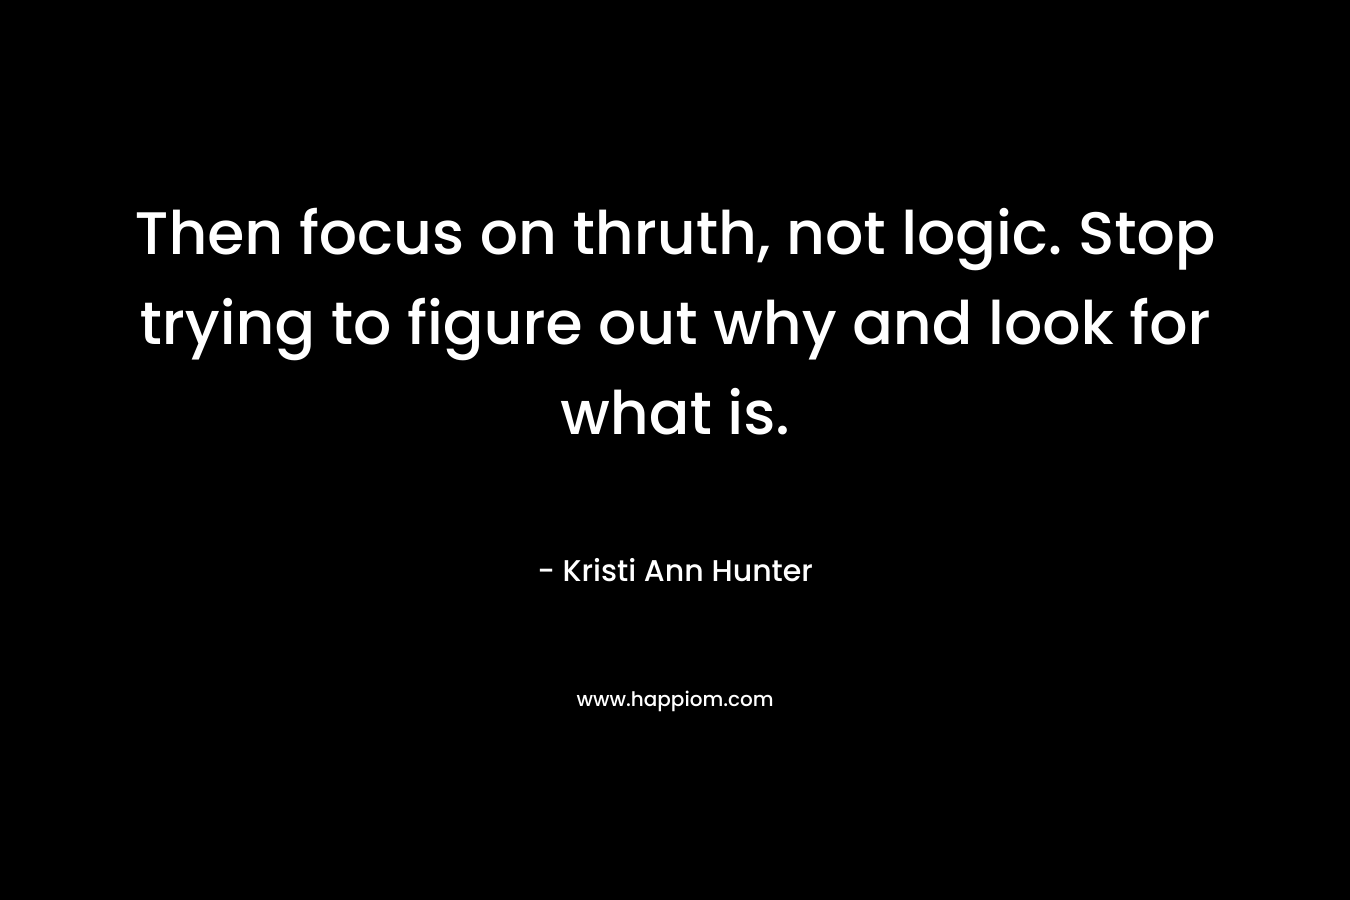 Then focus on thruth, not logic. Stop trying to figure out why and look for what is.